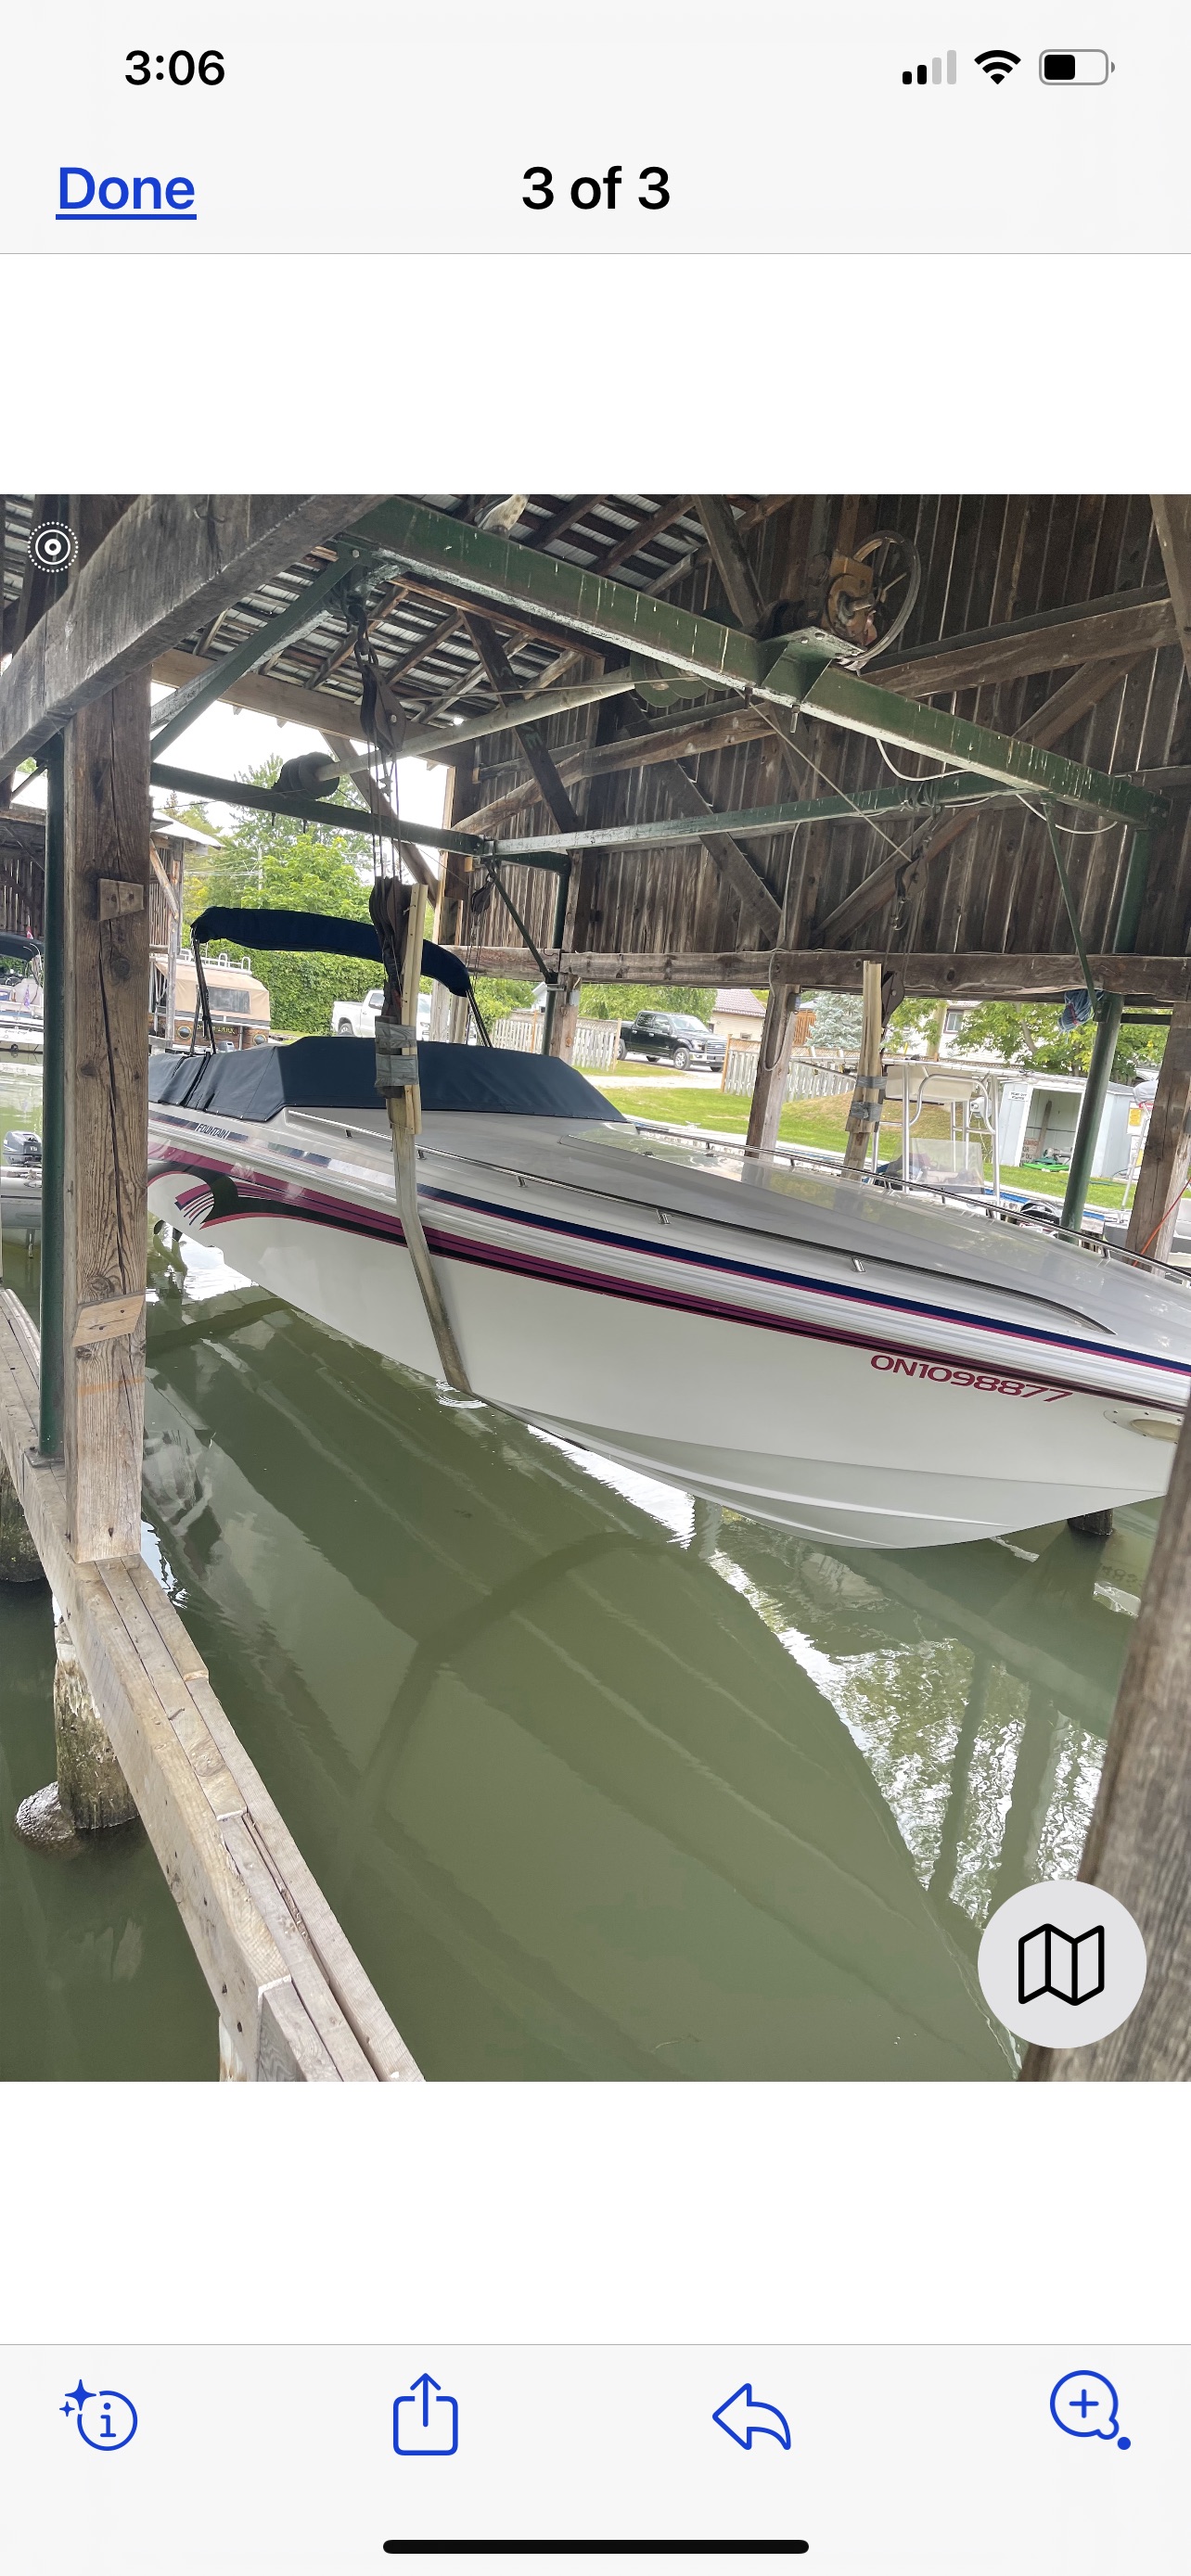 1997 38 foot Fountain Fever  Power boat for sale in Ontario, Canada - image 18 